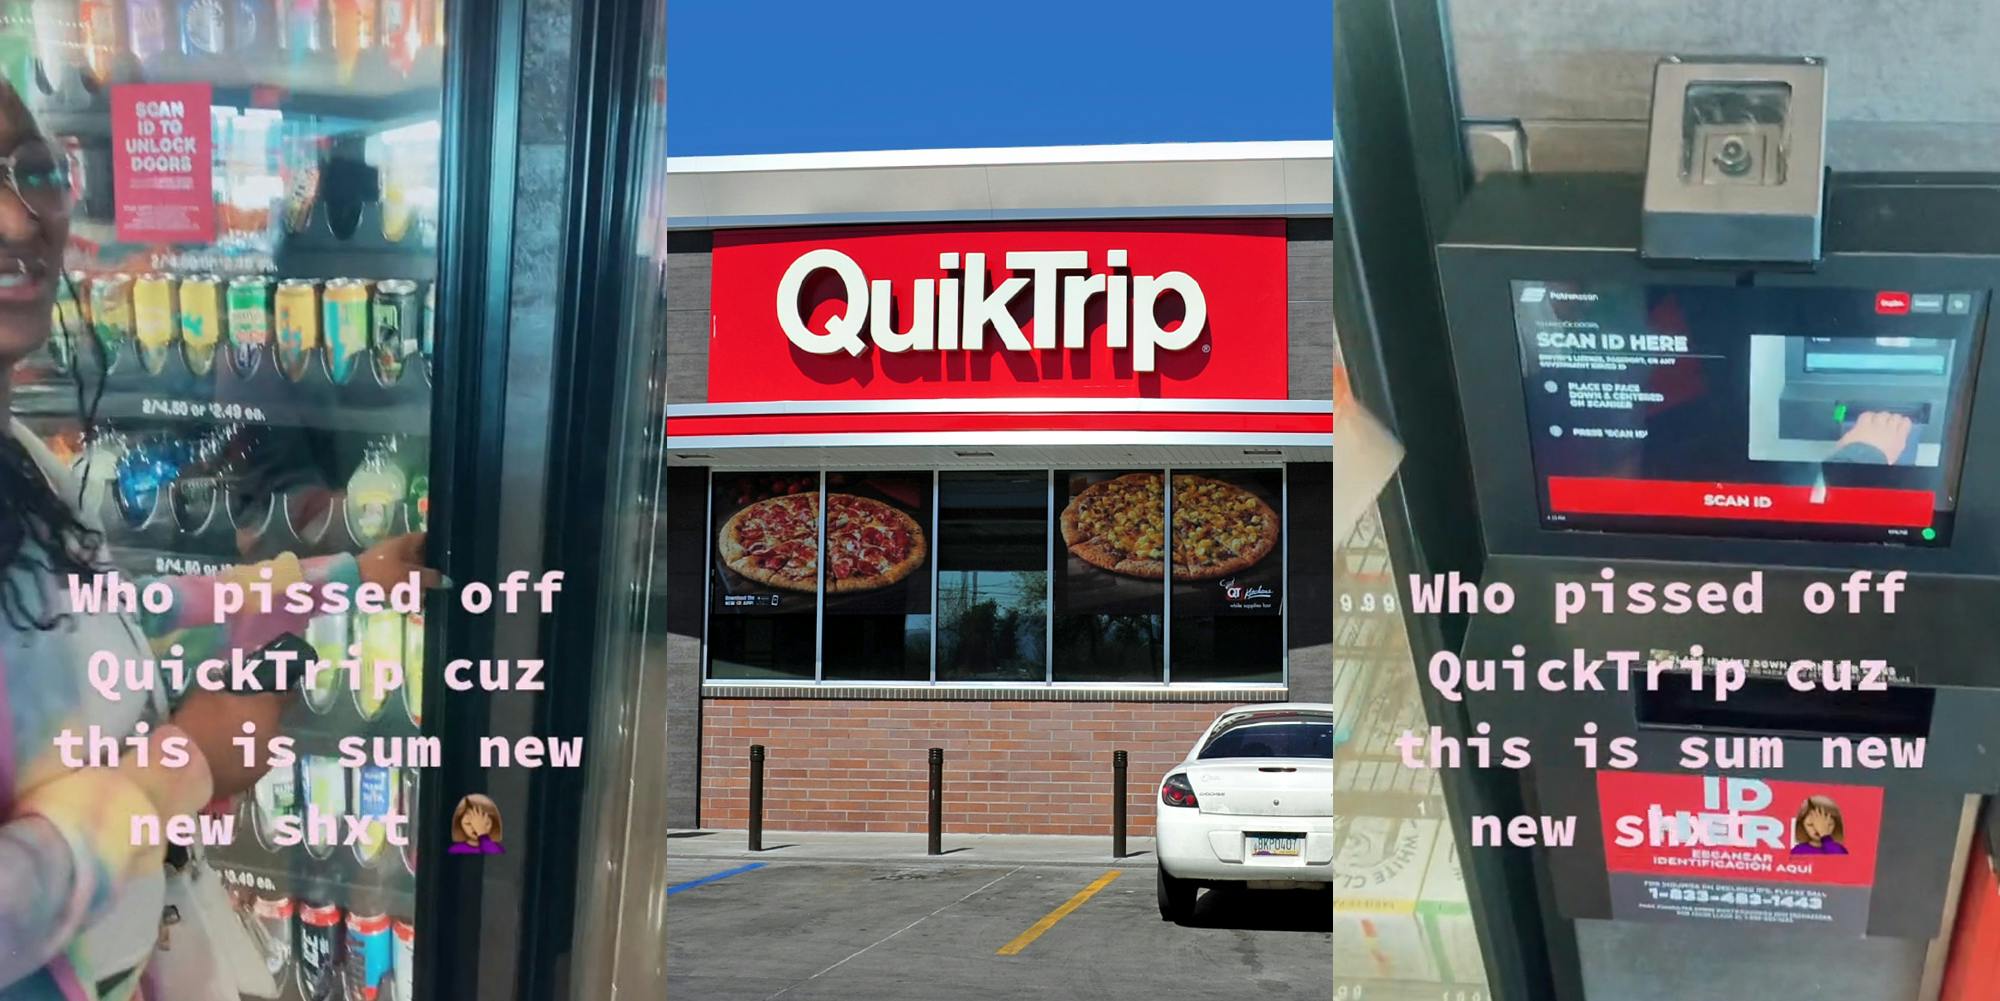 QuikTrip alcohol fridge with sticker on glass "SCAN ID TO UNLOCK DOORS" with caption "Who pissed off QuikTrip cuz this is sum new new shxt" (l) QuikTrip sign on building (c) QuikTrip interior with ID scanner with caption "Who pissed off QuikTrip cuz this is sum new new shxt" (r)